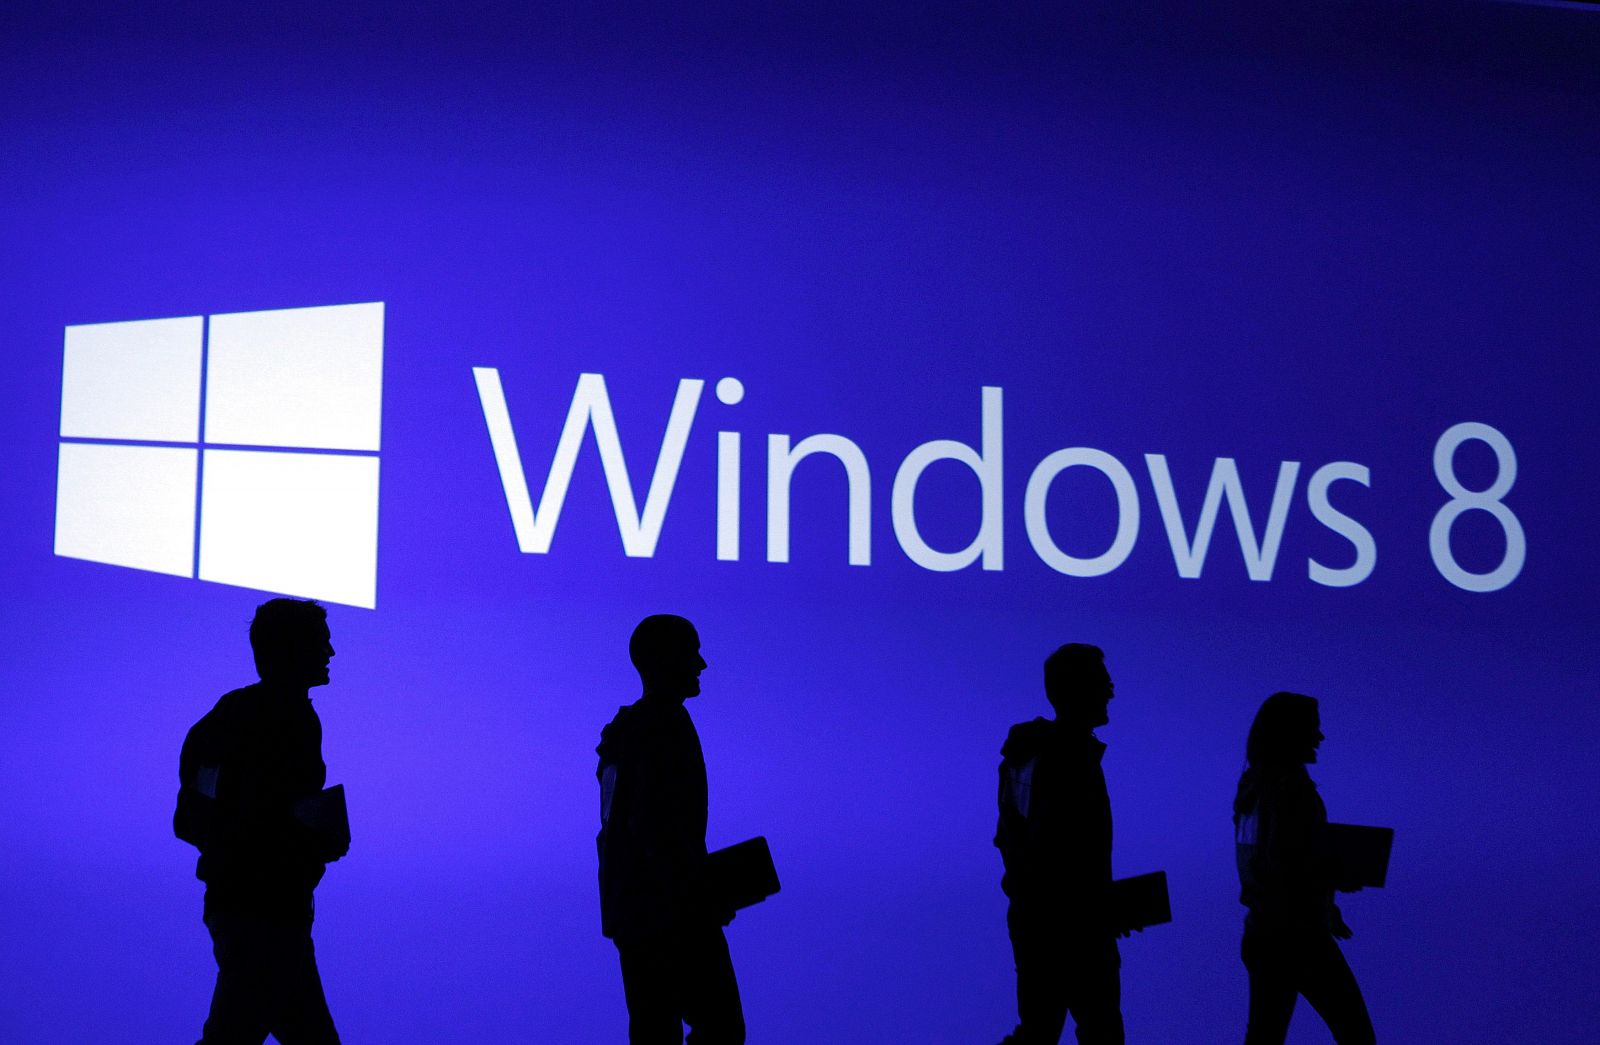 Guests are silhouetted at  the launch event of Windows 8 operating system in New York